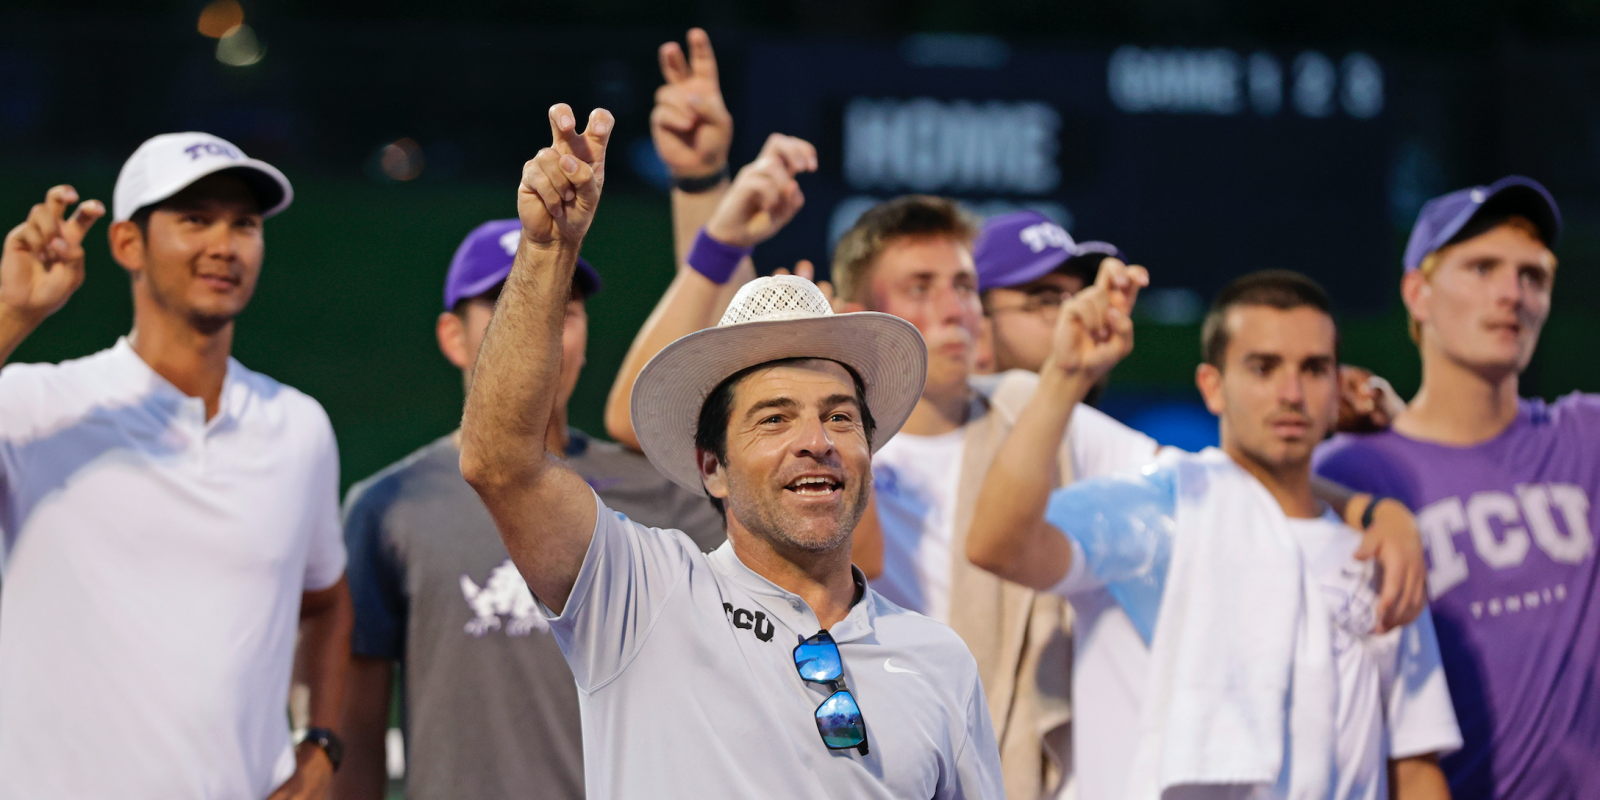 TCU Men's Tennis celebrates its 2022 national indoor title in Seattle with the Go Frogs hand sign